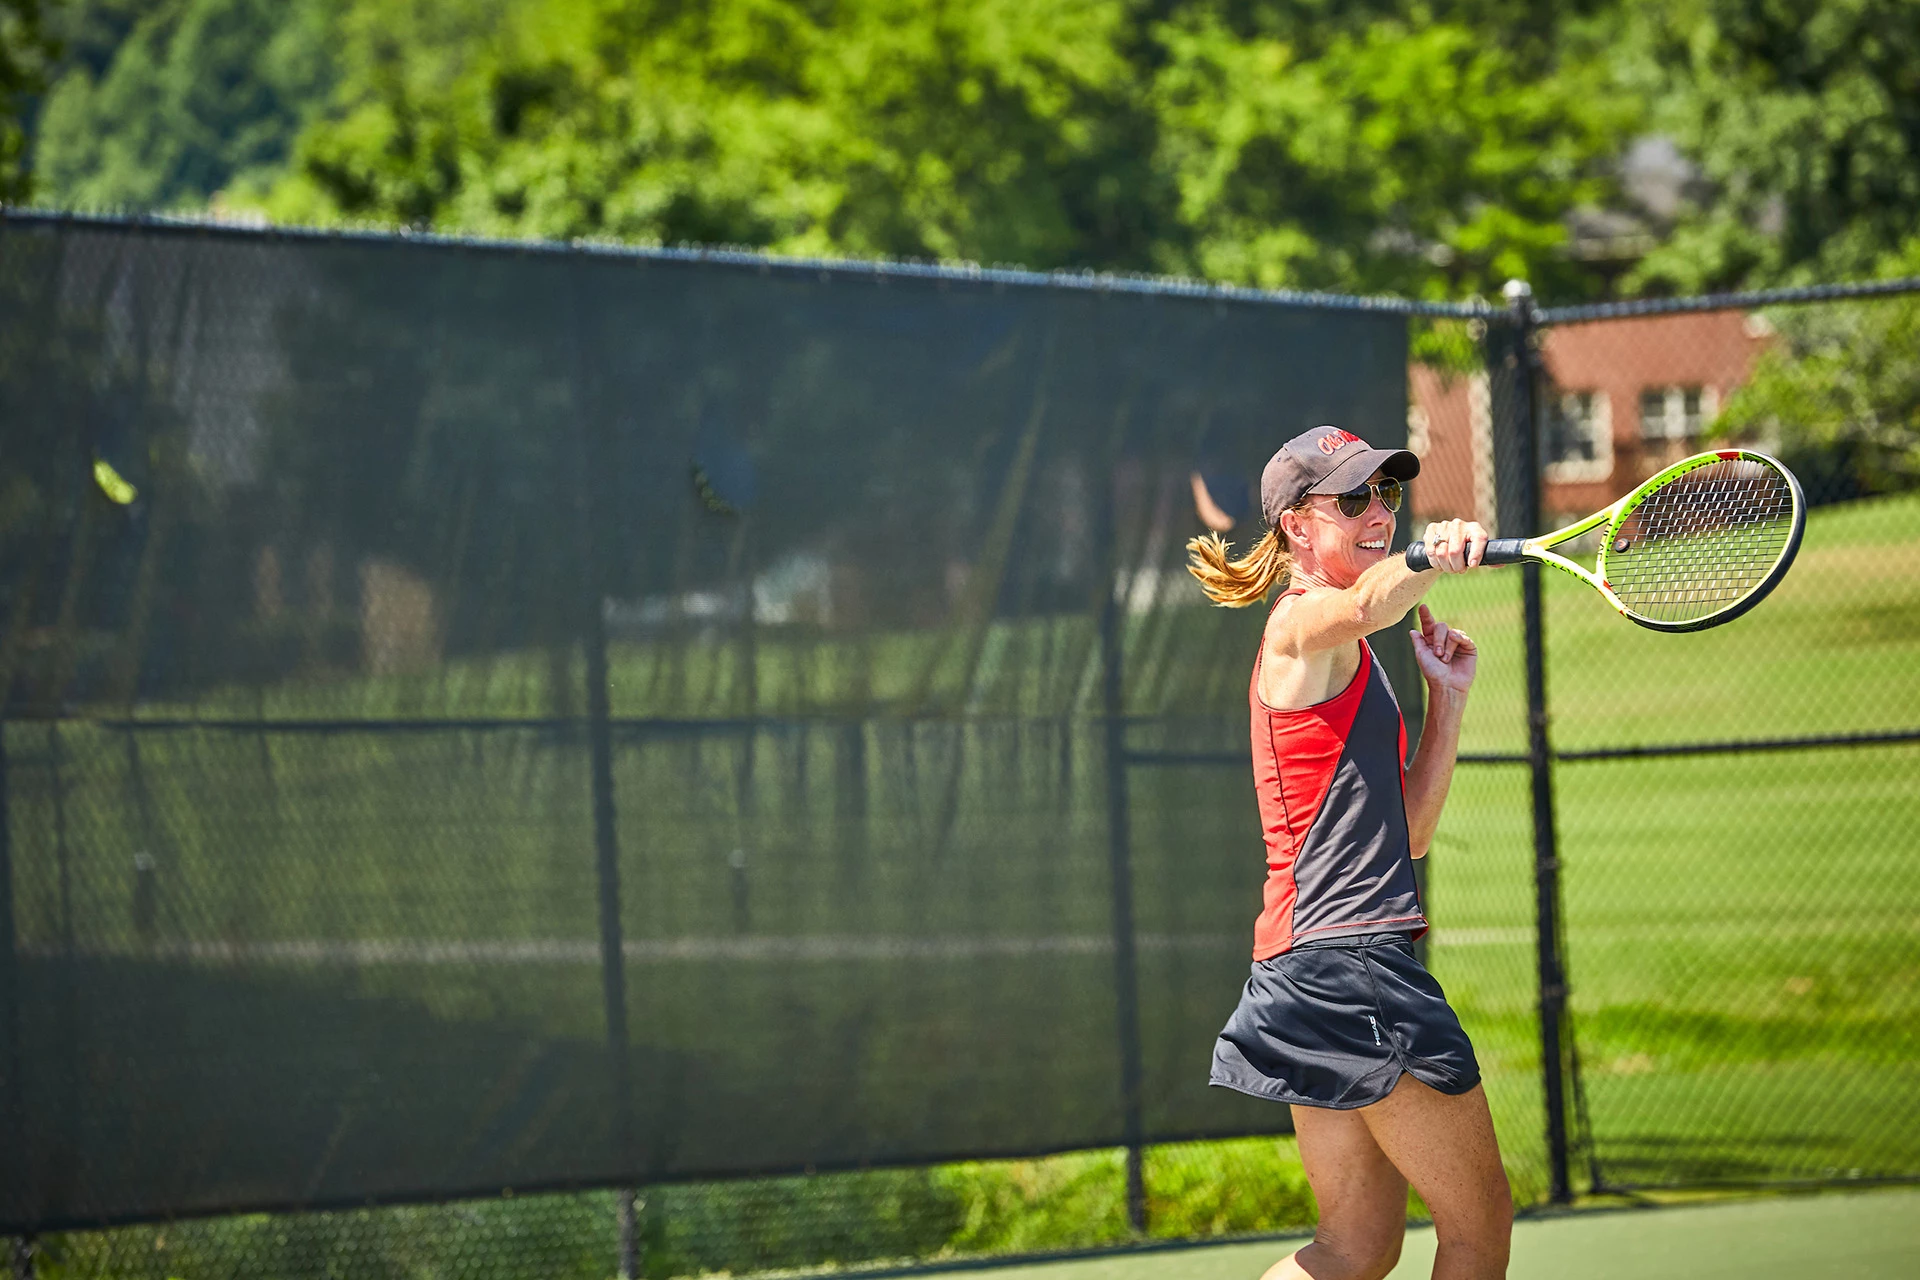 Temple Hills Country Club - Member playing tennis